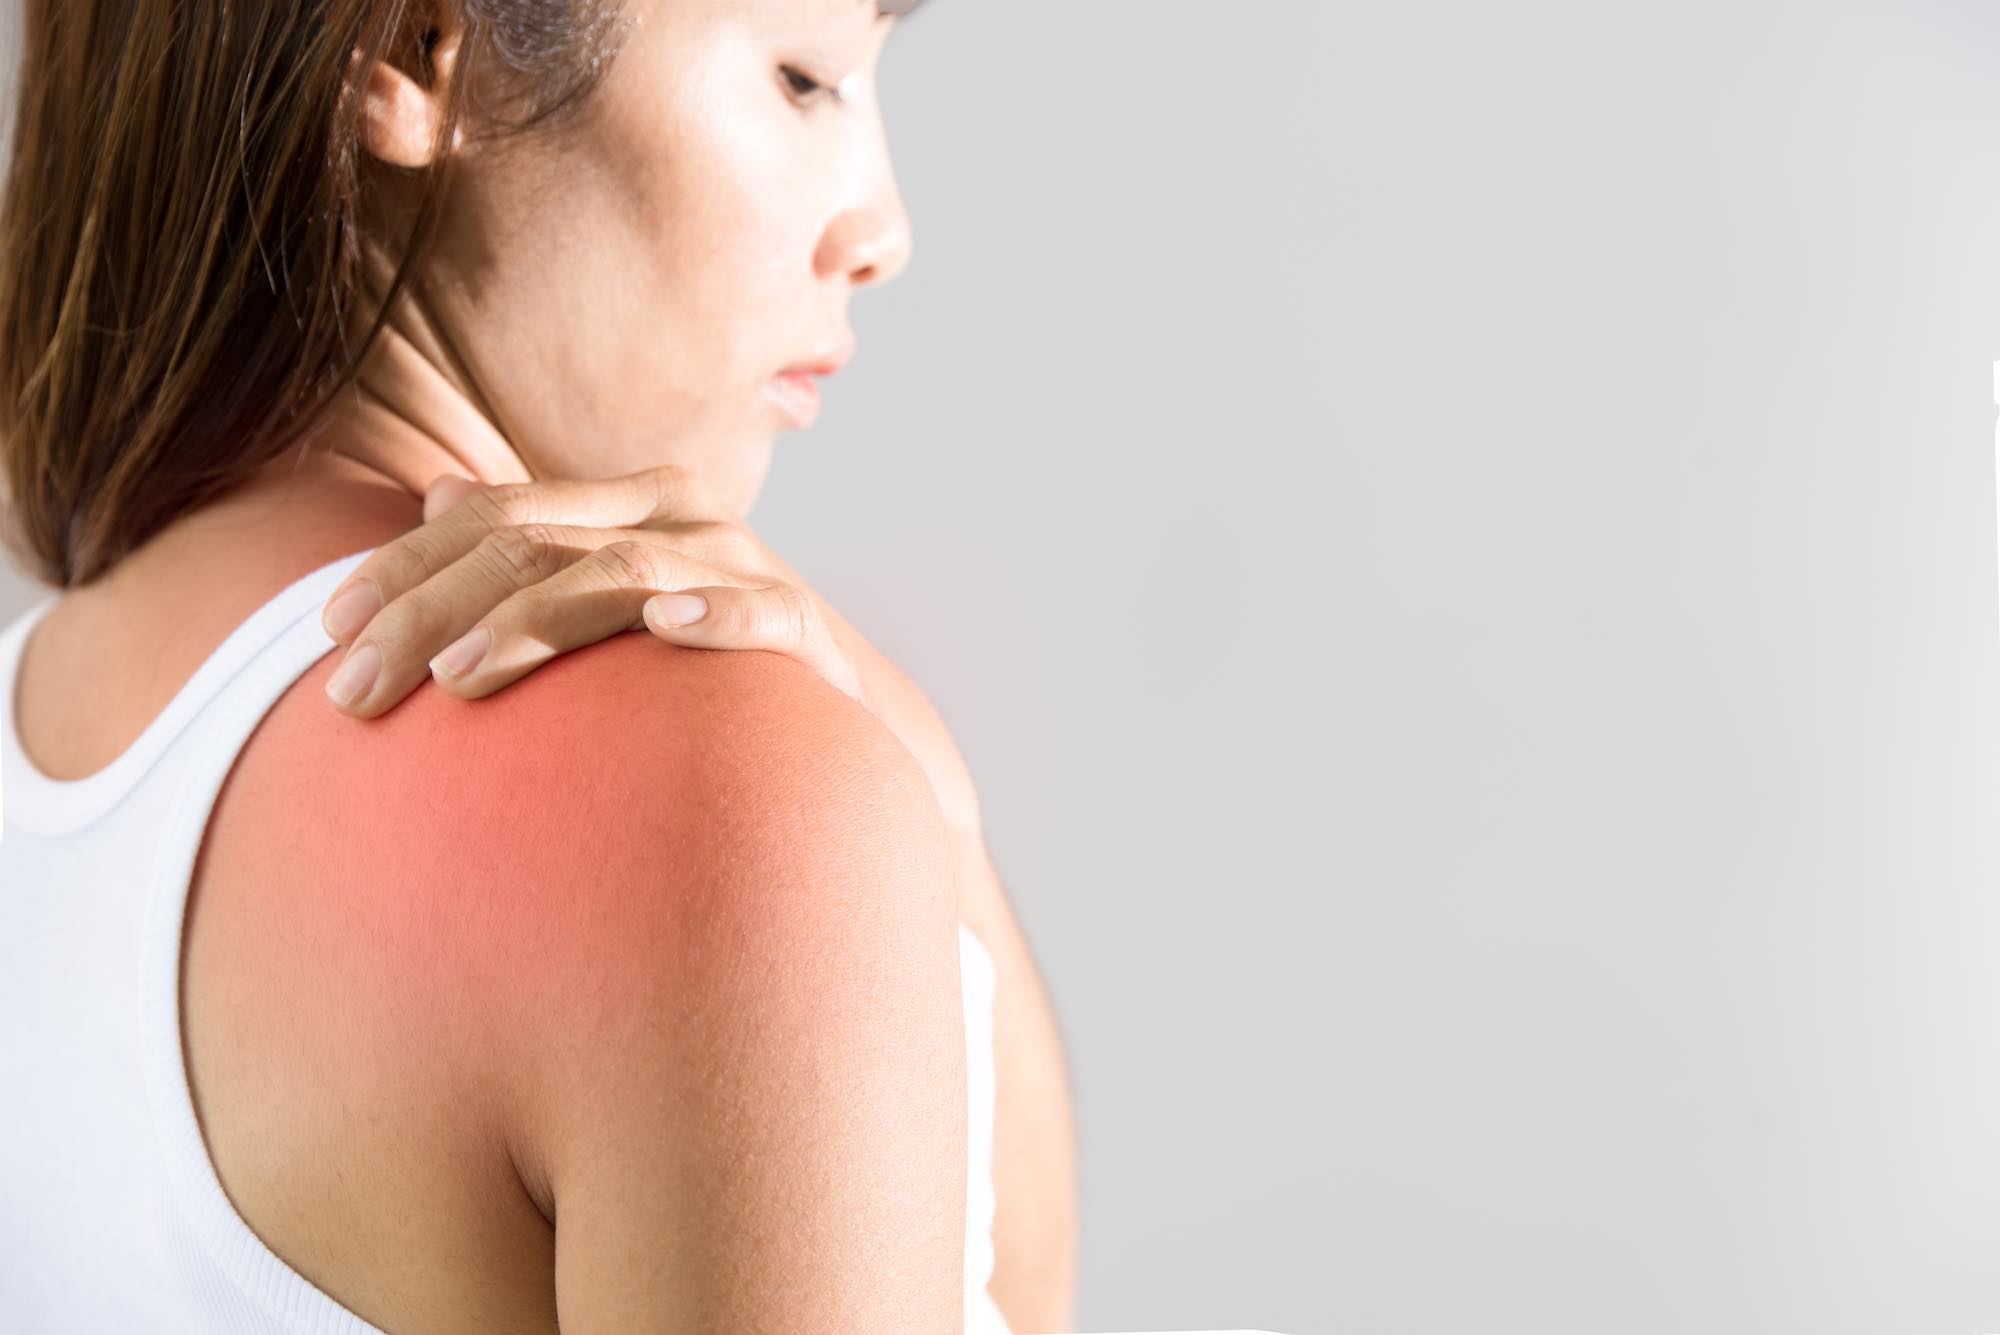 Shoulder Impingement Syndrome: What is it, Causes, Symptoms and Treatment